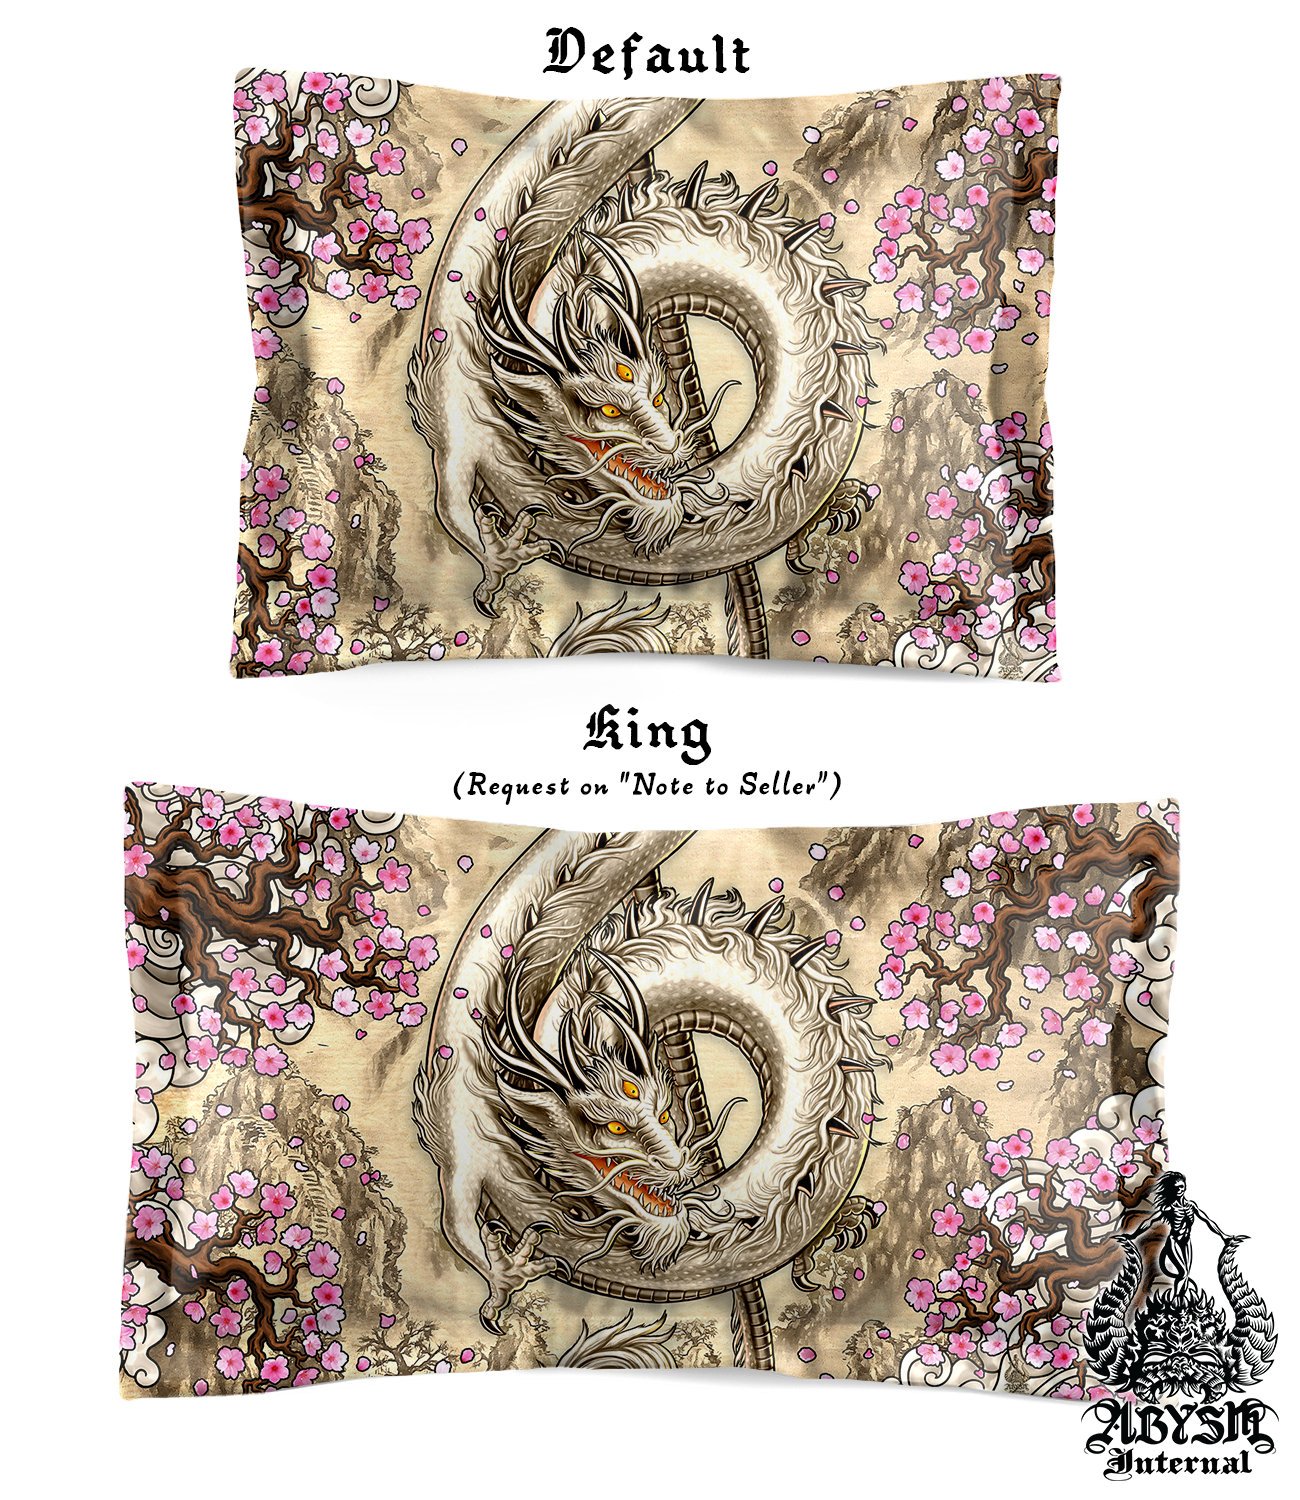 Chinese Dragon Bedding Set, Comforter and Duvet, Indie Bed Cover and Bedroom Decor, Music Art, King, Queen and Twin Size - Asian Painting - Abysm Internal